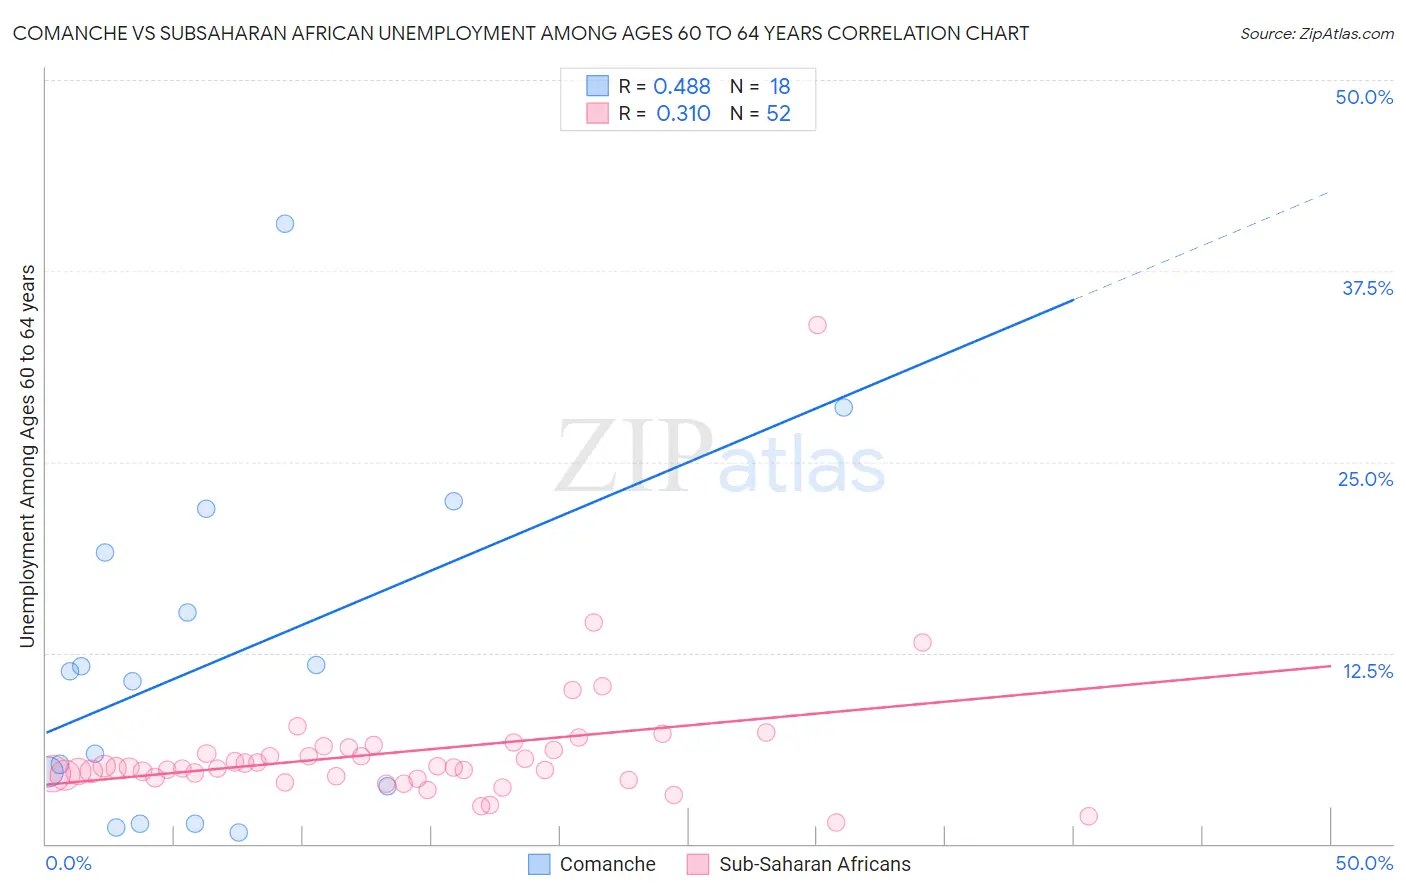 Comanche vs Subsaharan African Unemployment Among Ages 60 to 64 years